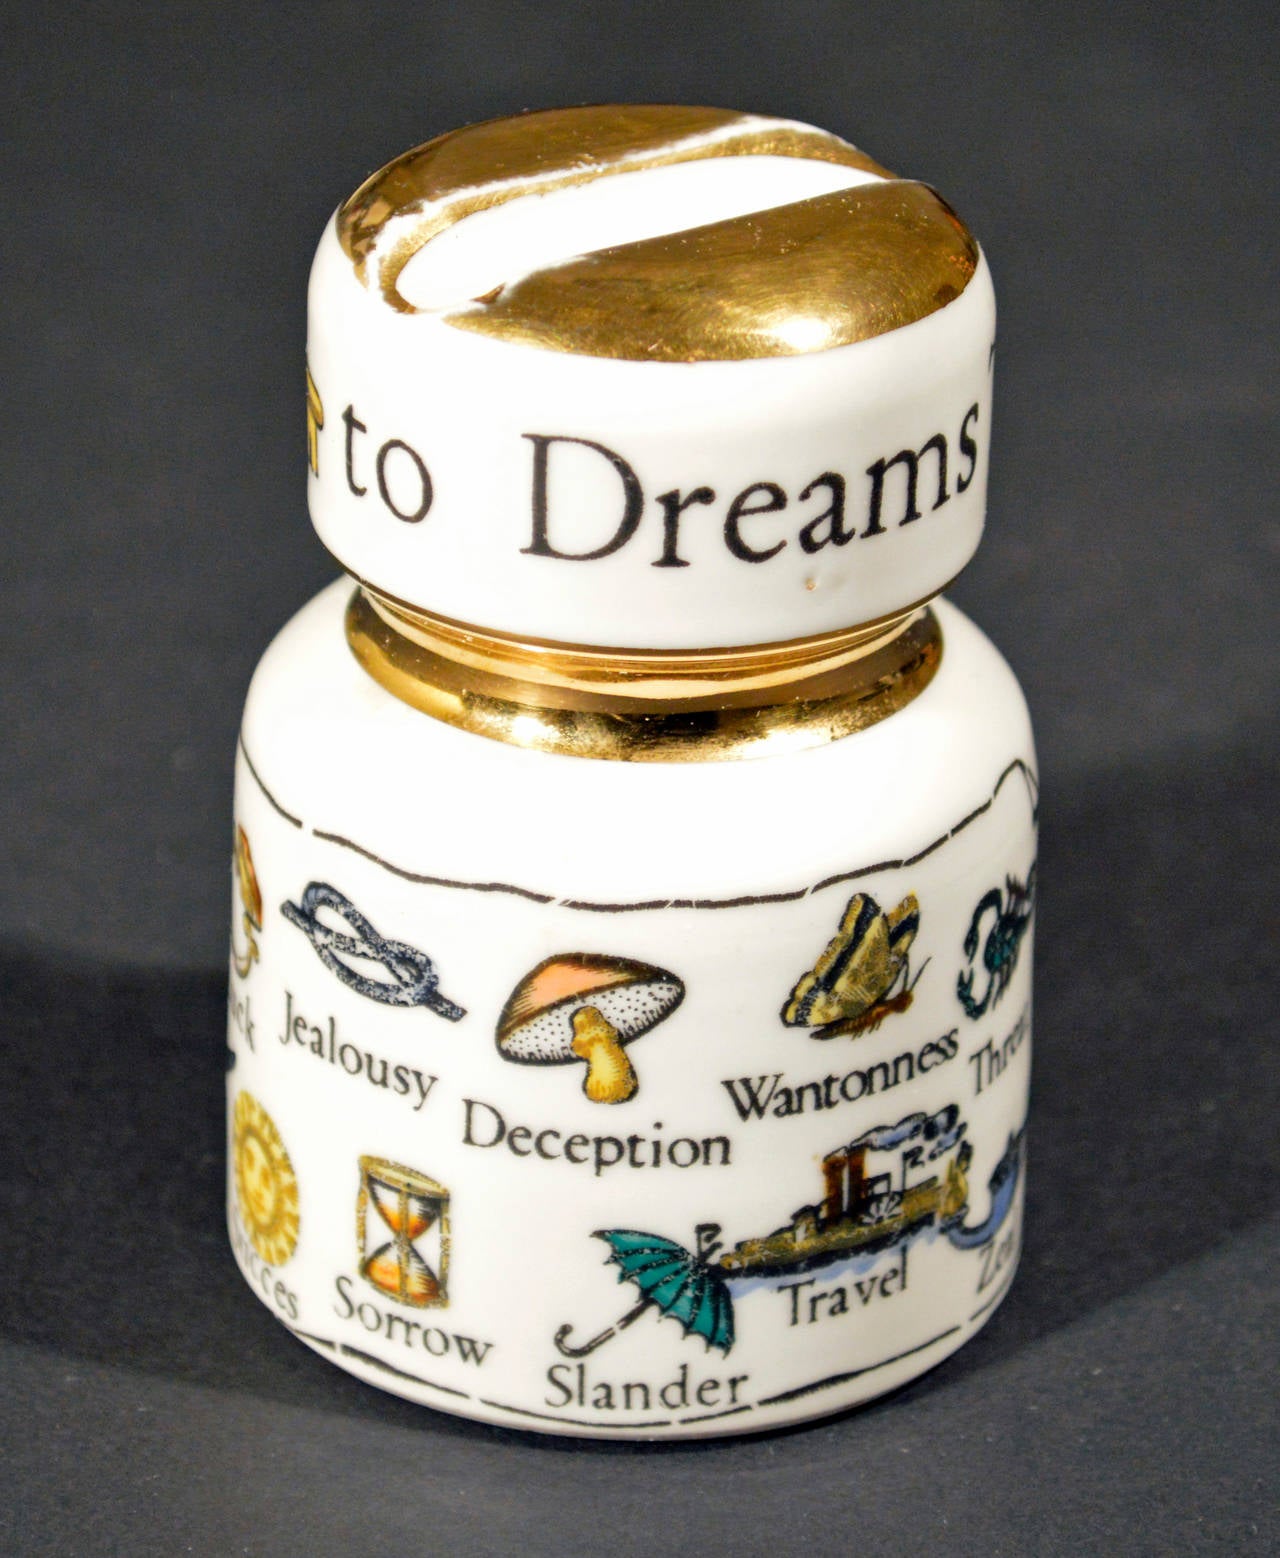 This is a great piece from Italian designer Piero Fornasetti's line of ceramic insulators, cleverly repurposed into paperweight pen rests and decorated with wonderfully wry designs. 

This is the very collectible English-language version of The